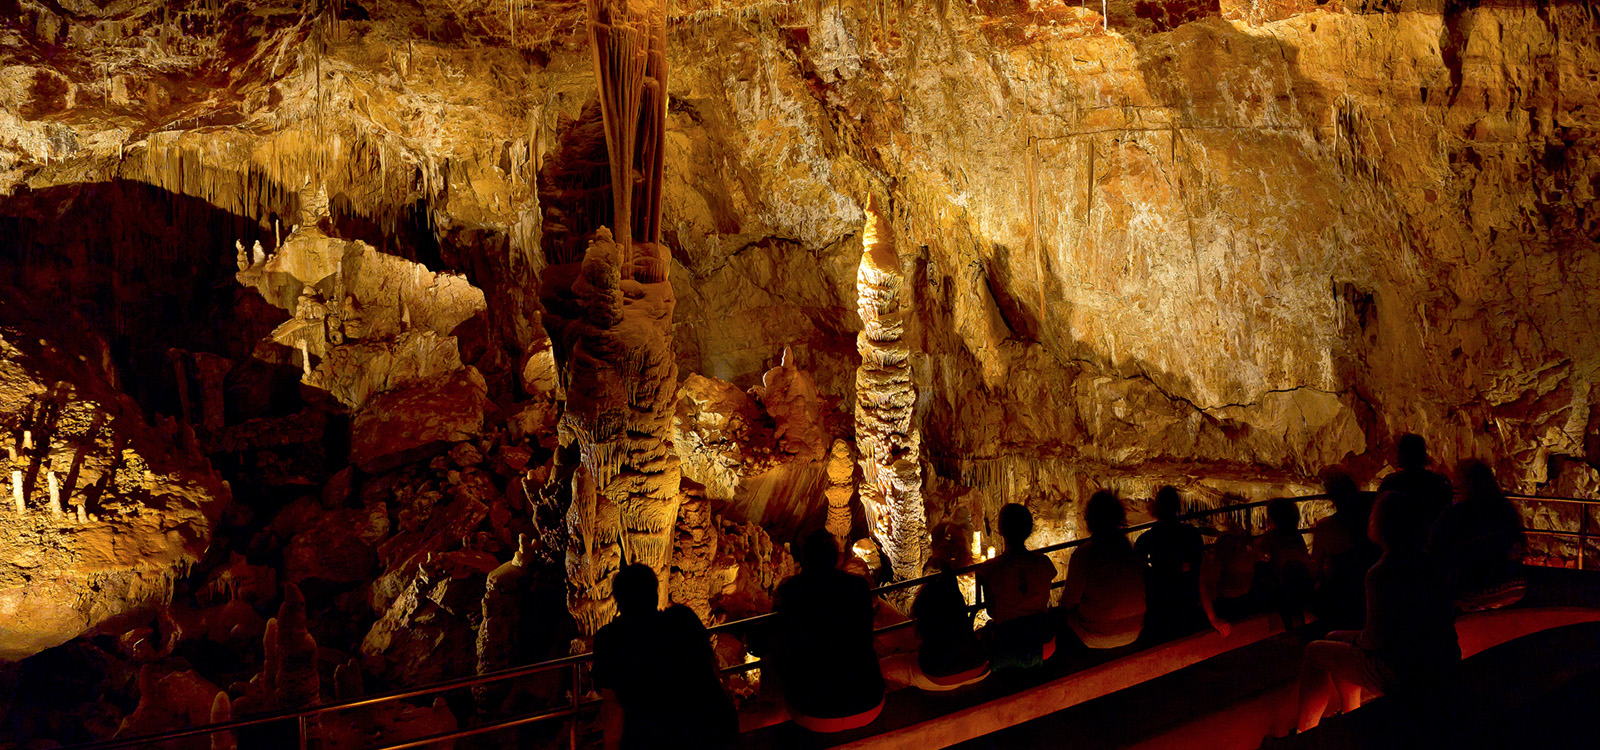 A group sits in front of Kubla Khan, a column formation in the Throne Room